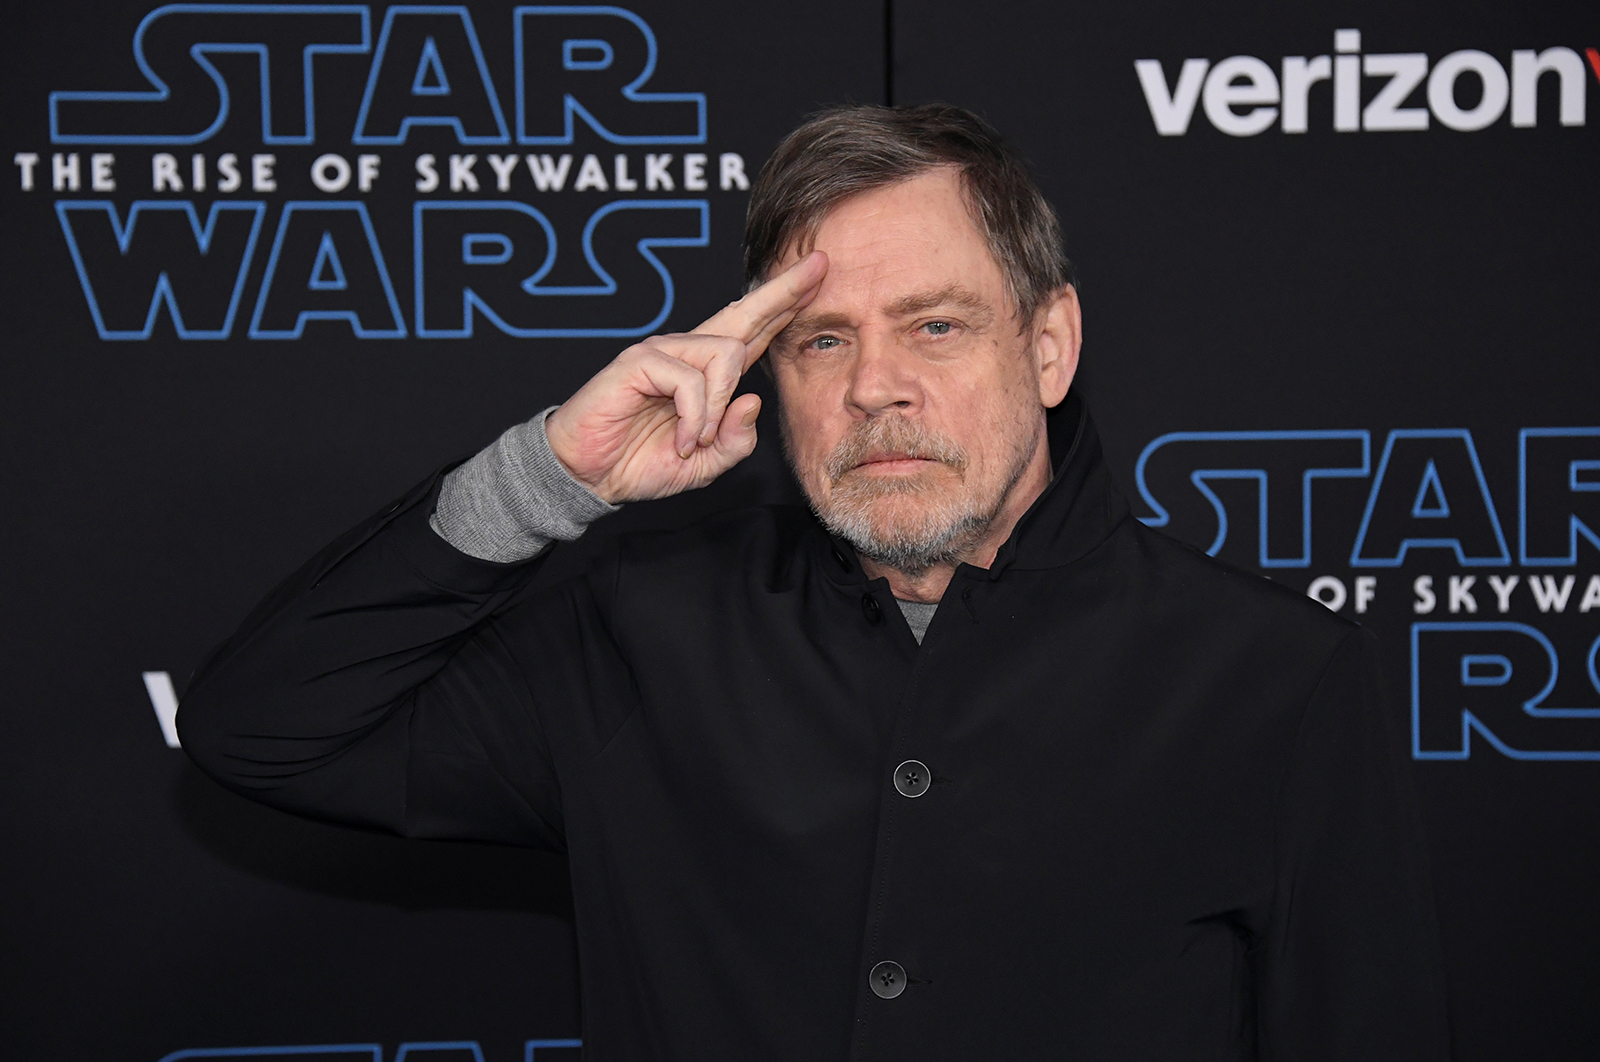 Actor Mark Hamil attends the premiere of "Star Wars: The Rise of Skywalker" in Los Angeles on December 16, 2019.